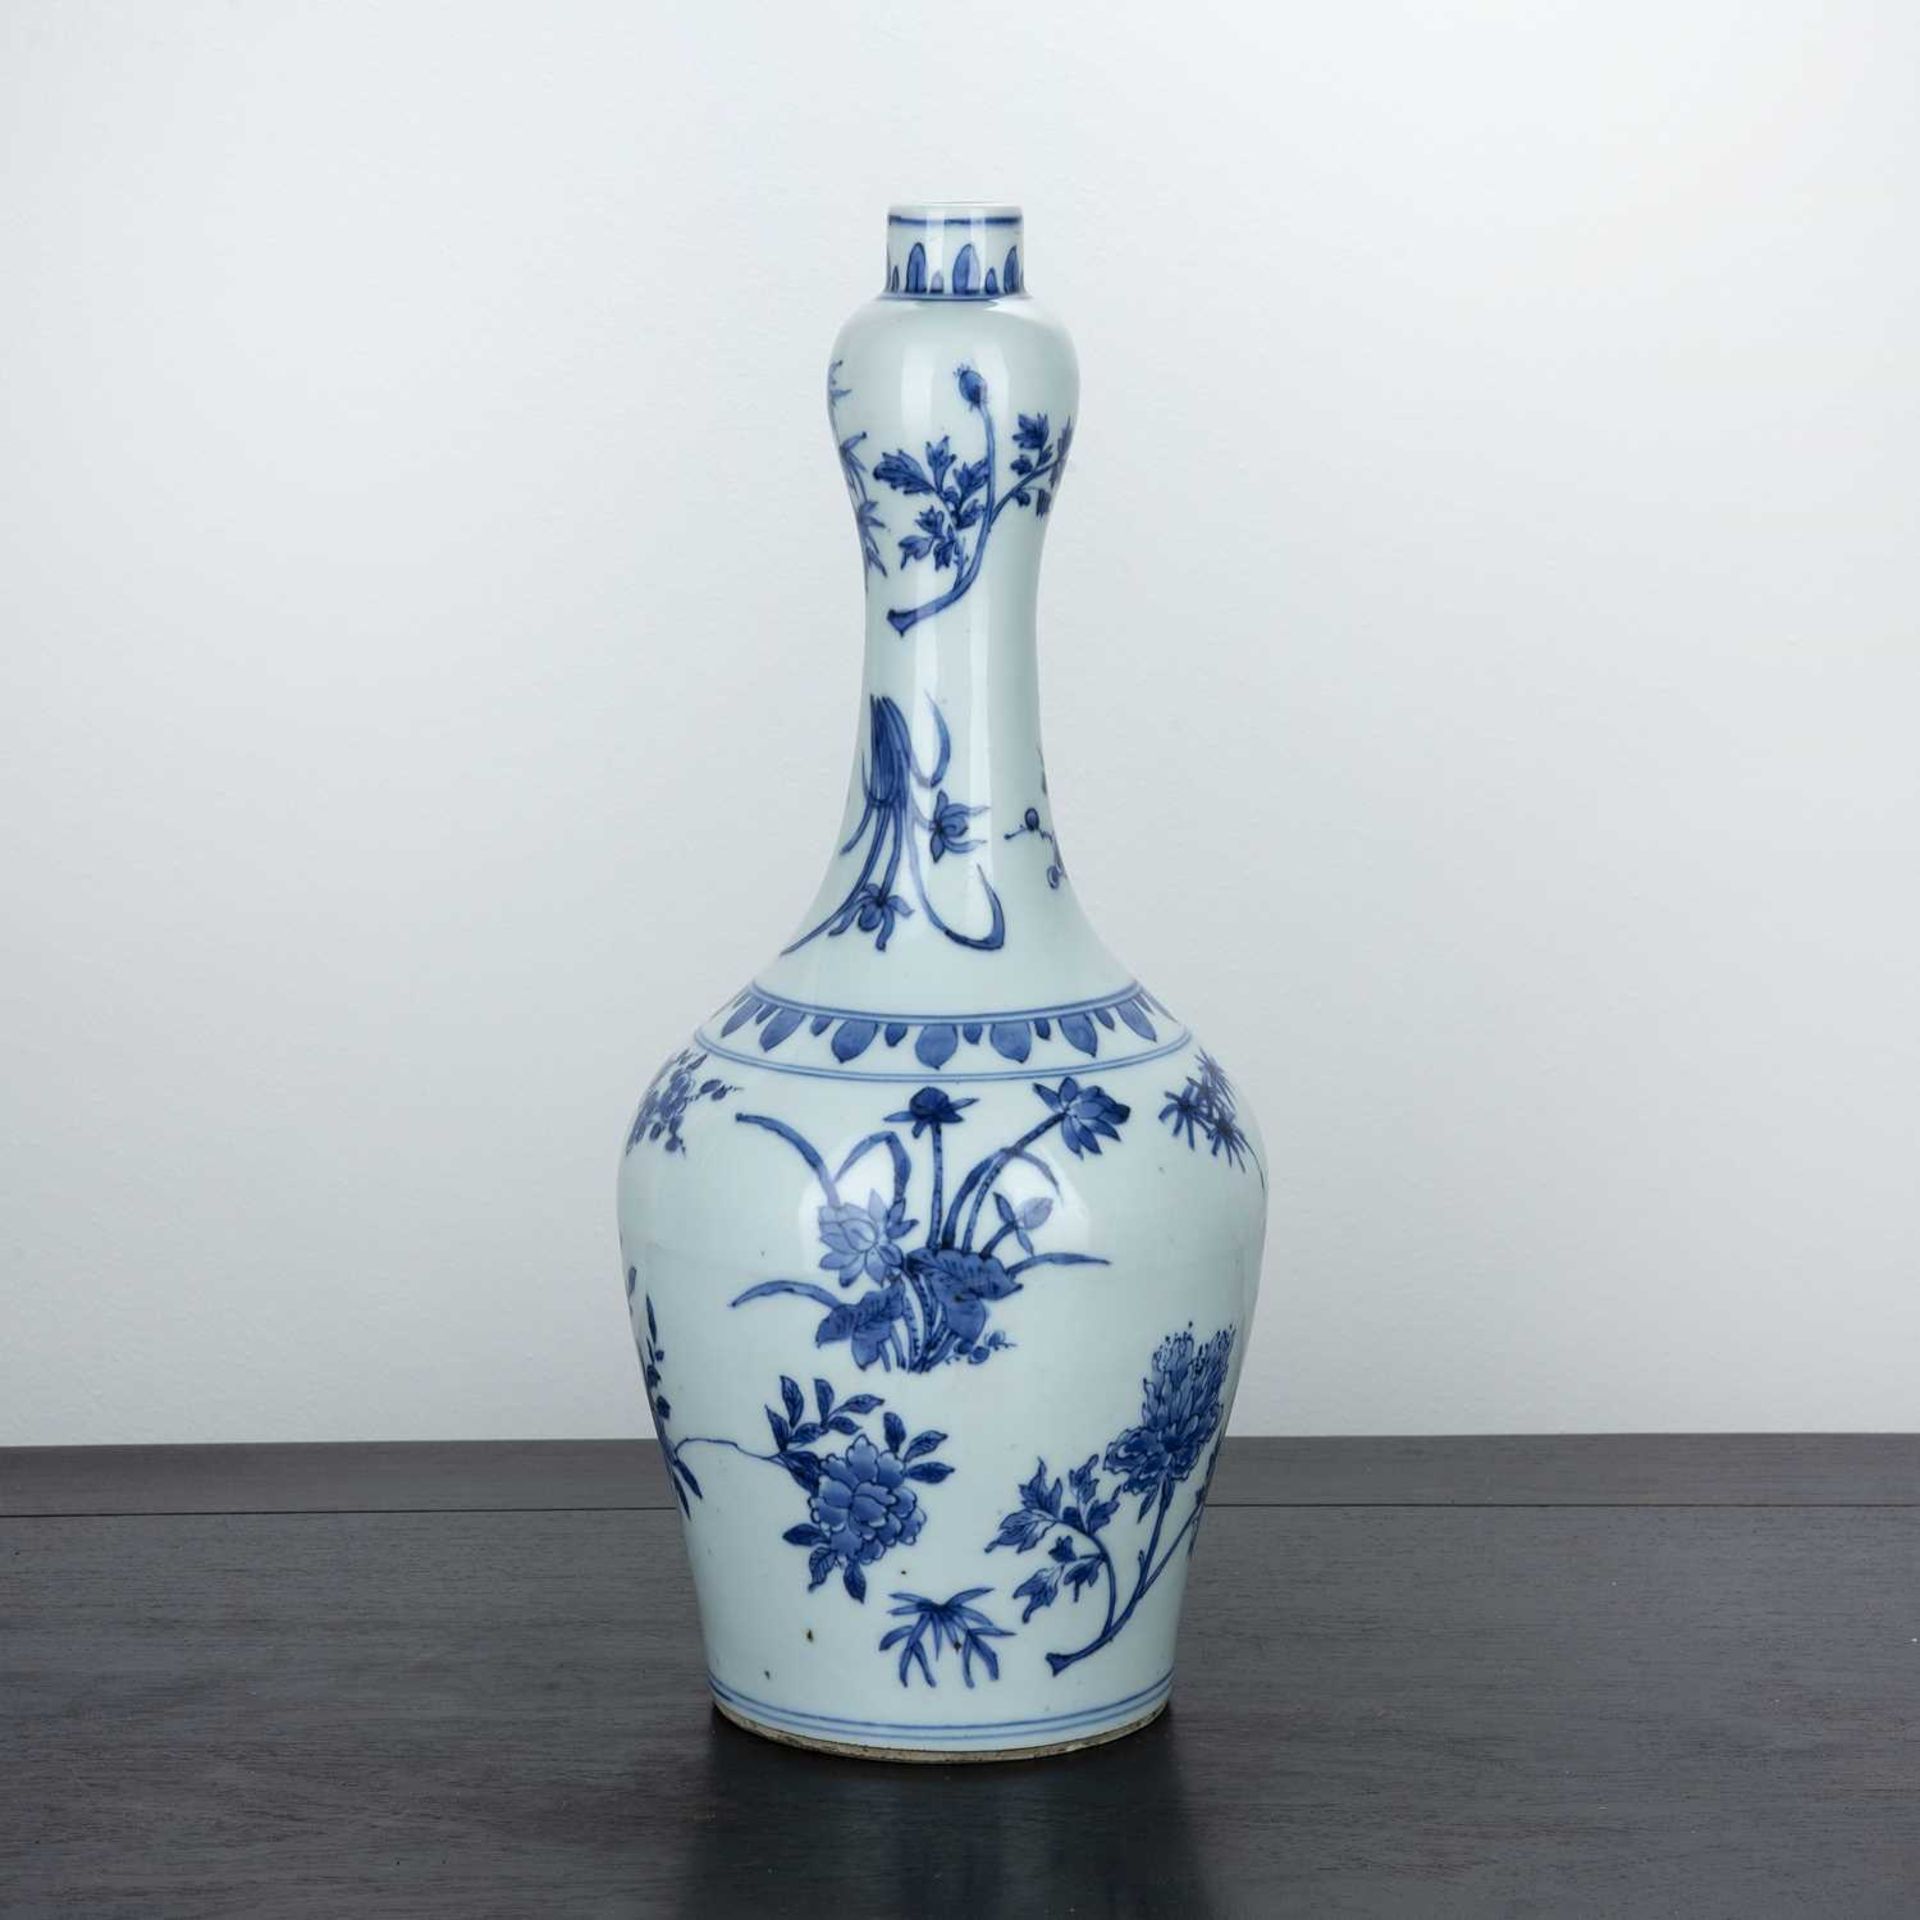 Blue and white vase Chinese of transitional style, the compressed globular body rising to a tall